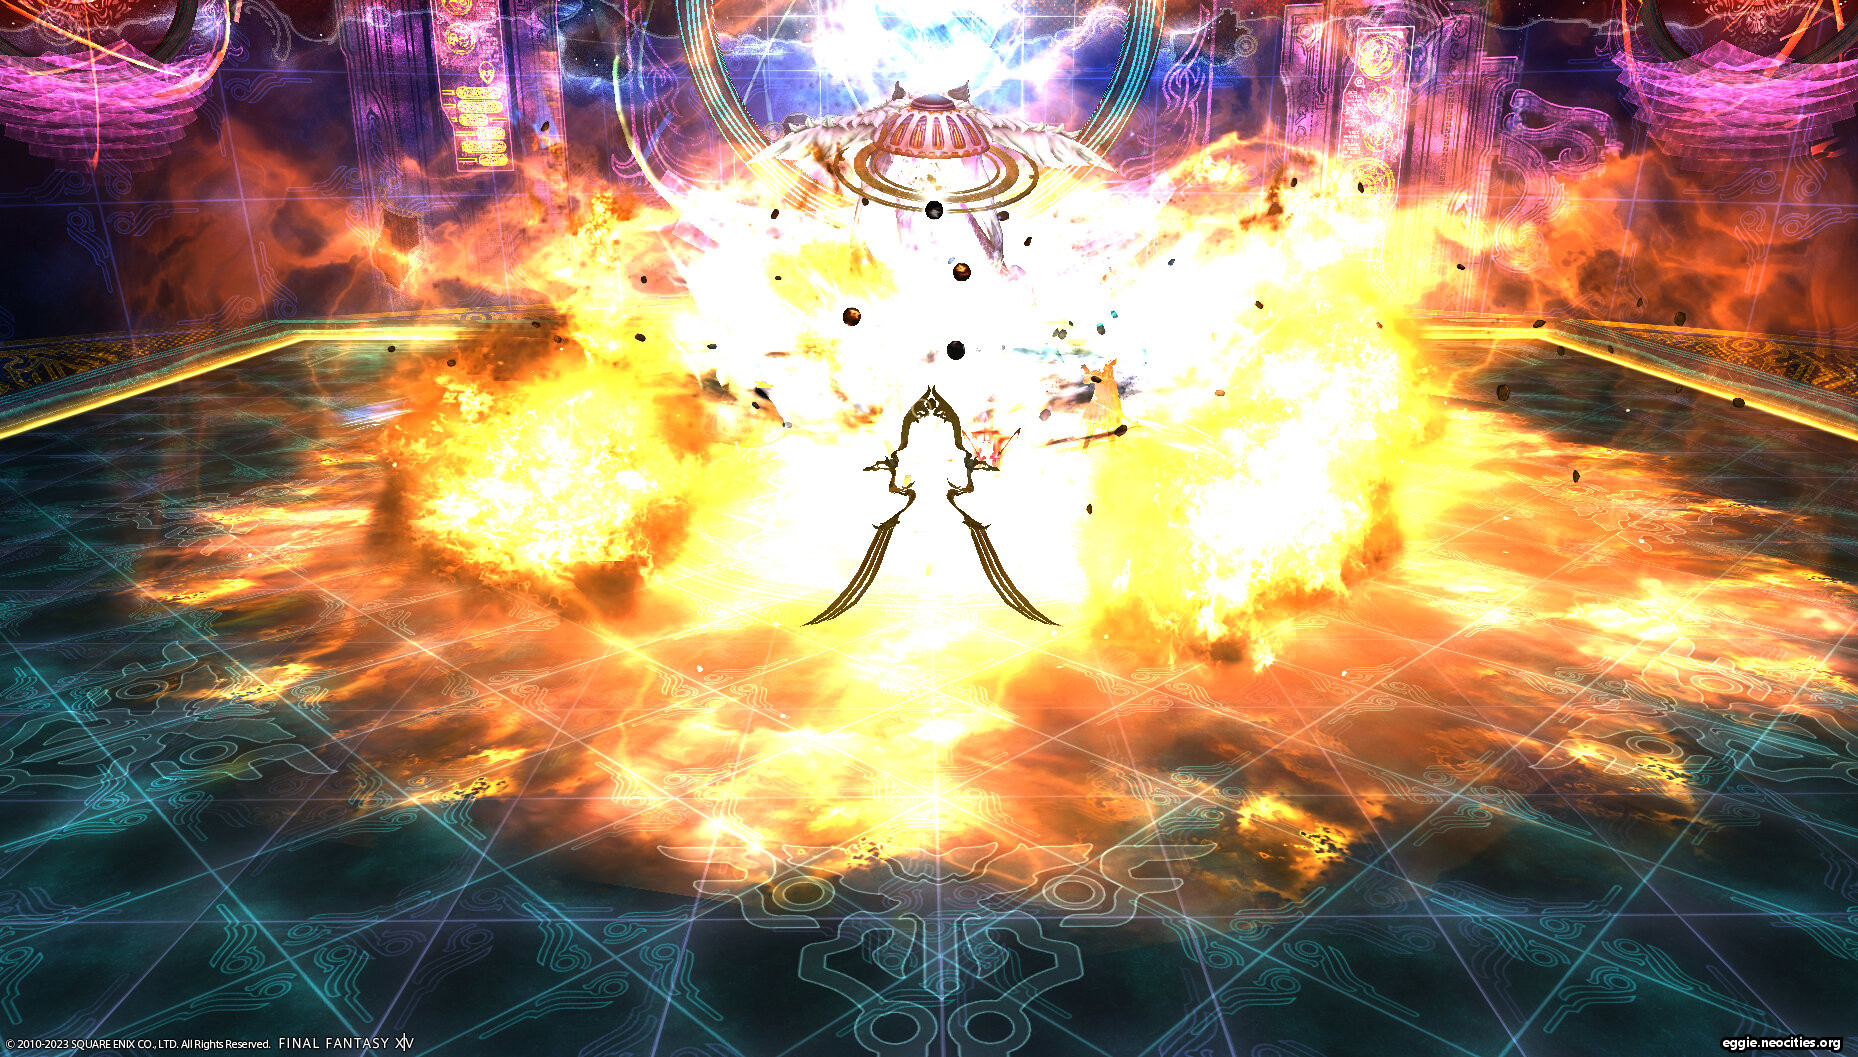 A large explosion as several blue mages spam their spells. Zel can be seen casting Quasar.